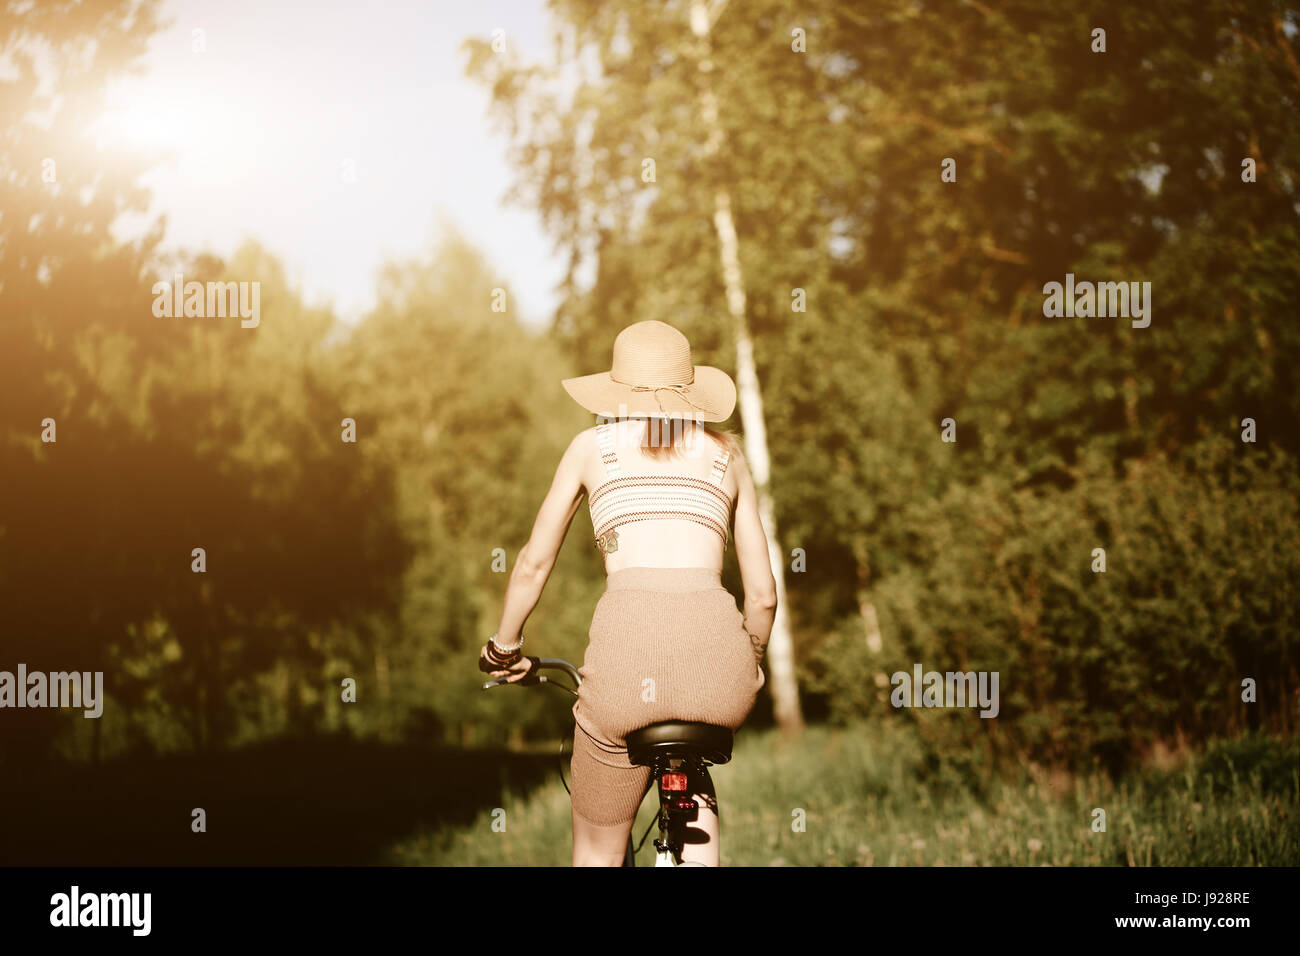 Funny girl driving bicycle outdoor. Sunny summer lifestyle concept. Woman in dress and hat in Field with dandelions. Female ride in park. Light photo  Stock Photo